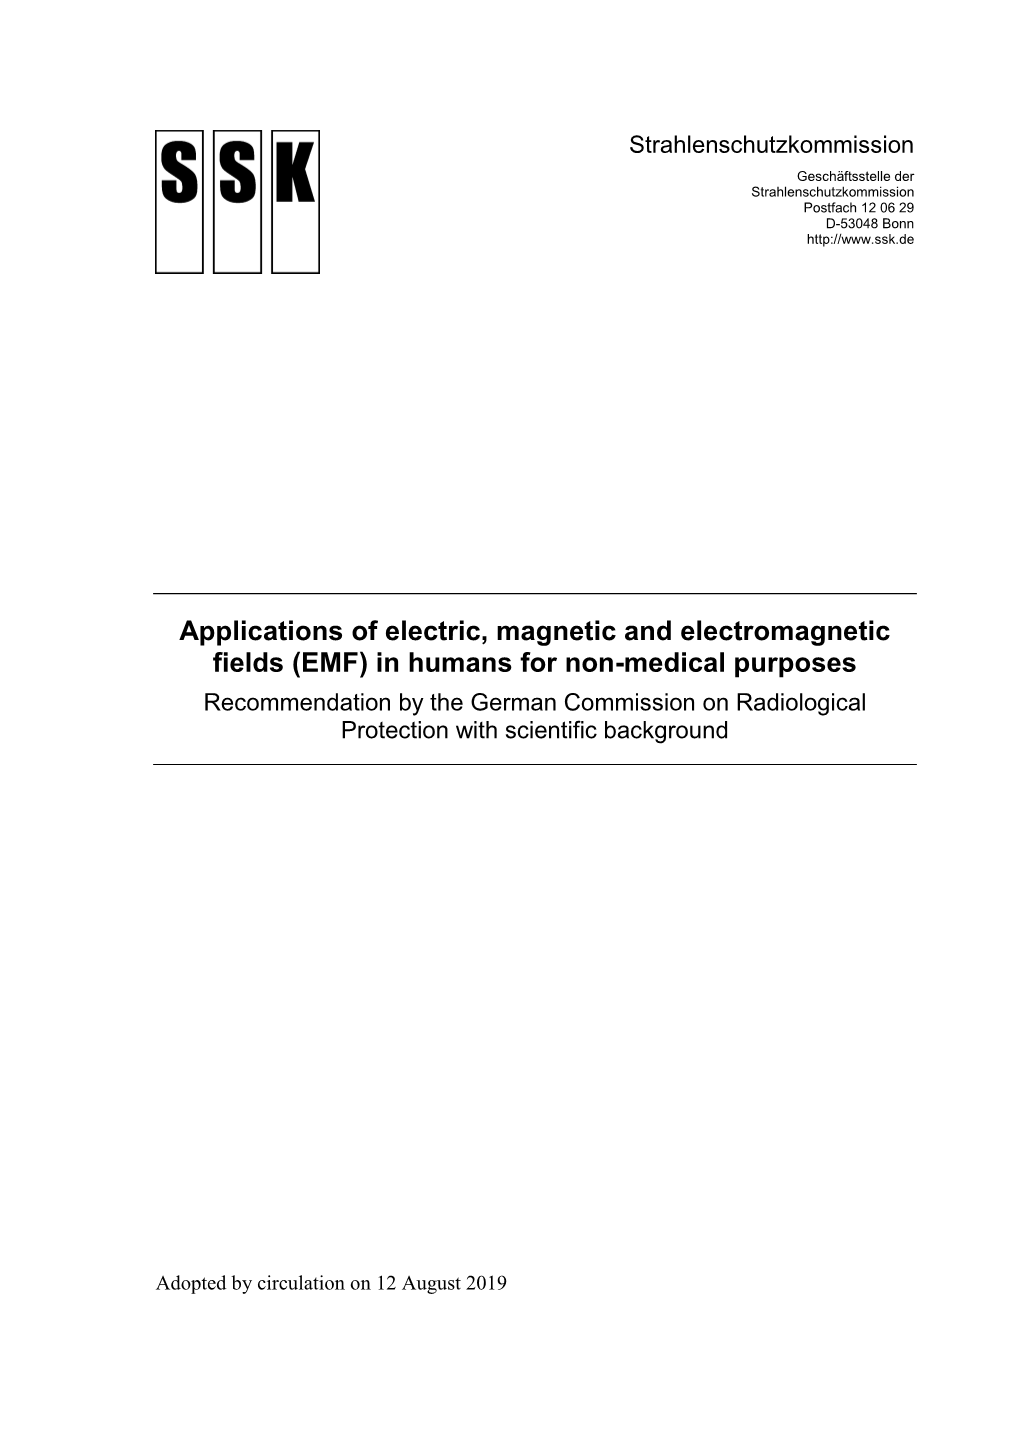 EMF) in Humans for Non-Medical Purposes Recommendation by the German Commission on Radiological Protection with Scientific Background